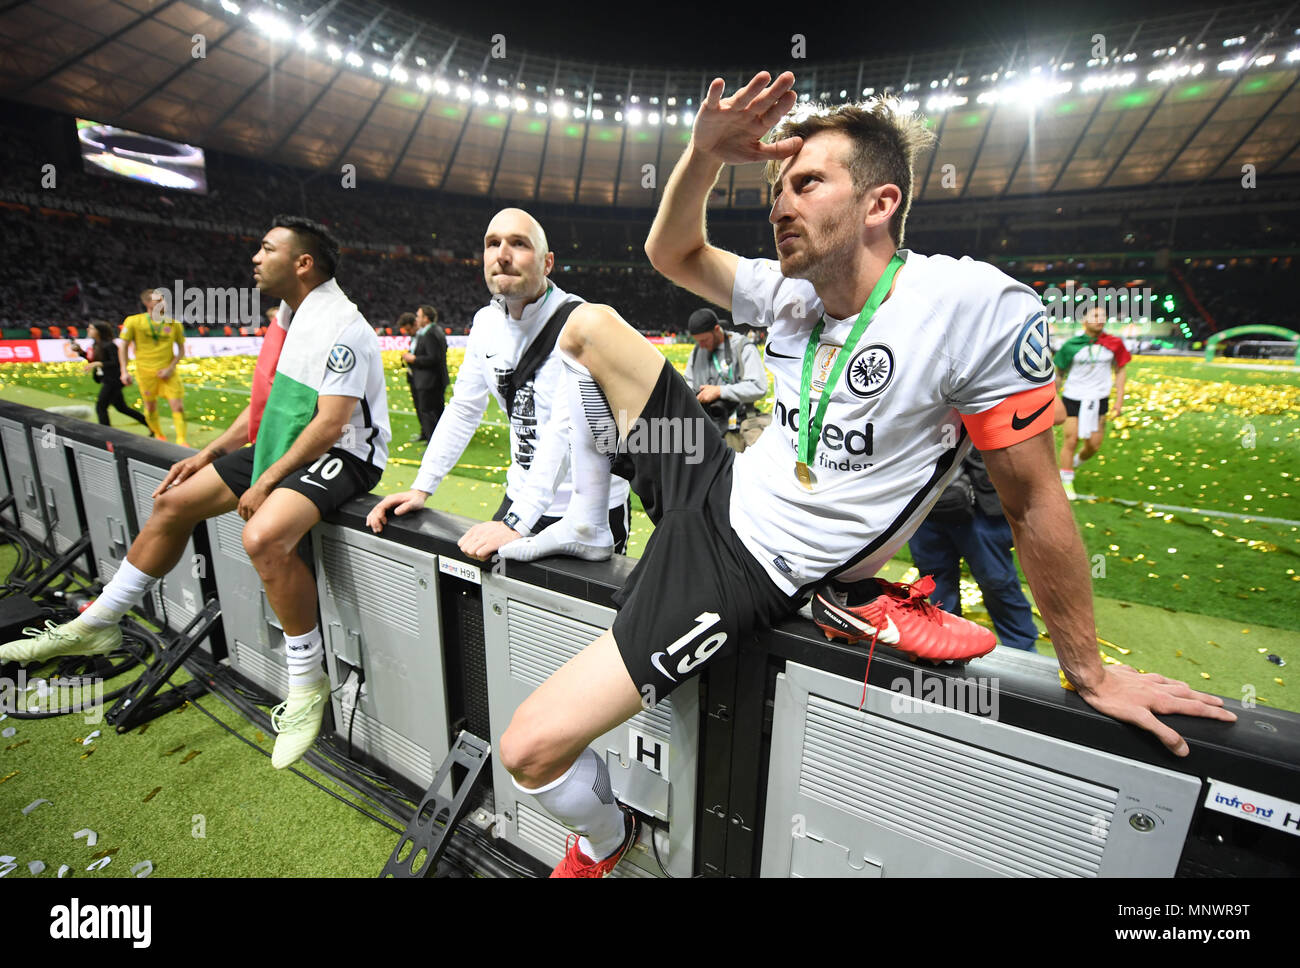 Berlin, Germany. 19th May 2018. Football, German DFB Cup final, FC Bayern Munich vs Eintracht Frankfurt at the Olympic Stadium. Marco Fabian (l) and David Abraham (r) of Eintracht Frankfurt pictured after the win. Photo: Arne Dedert/dpa Credit: dpa picture alliance/Alamy Live News Credit: dpa picture alliance/Alamy Live News Credit: dpa picture alliance/Alamy Live News Credit: dpa picture alliance/Alamy Live News Credit: dpa picture alliance/Alamy Live News Credit: dpa picture alliance/Alamy Live News Credit: dpa picture alliance/Alamy Live News Credit: dpa picture alliance/Alamy Live News Stock Photo